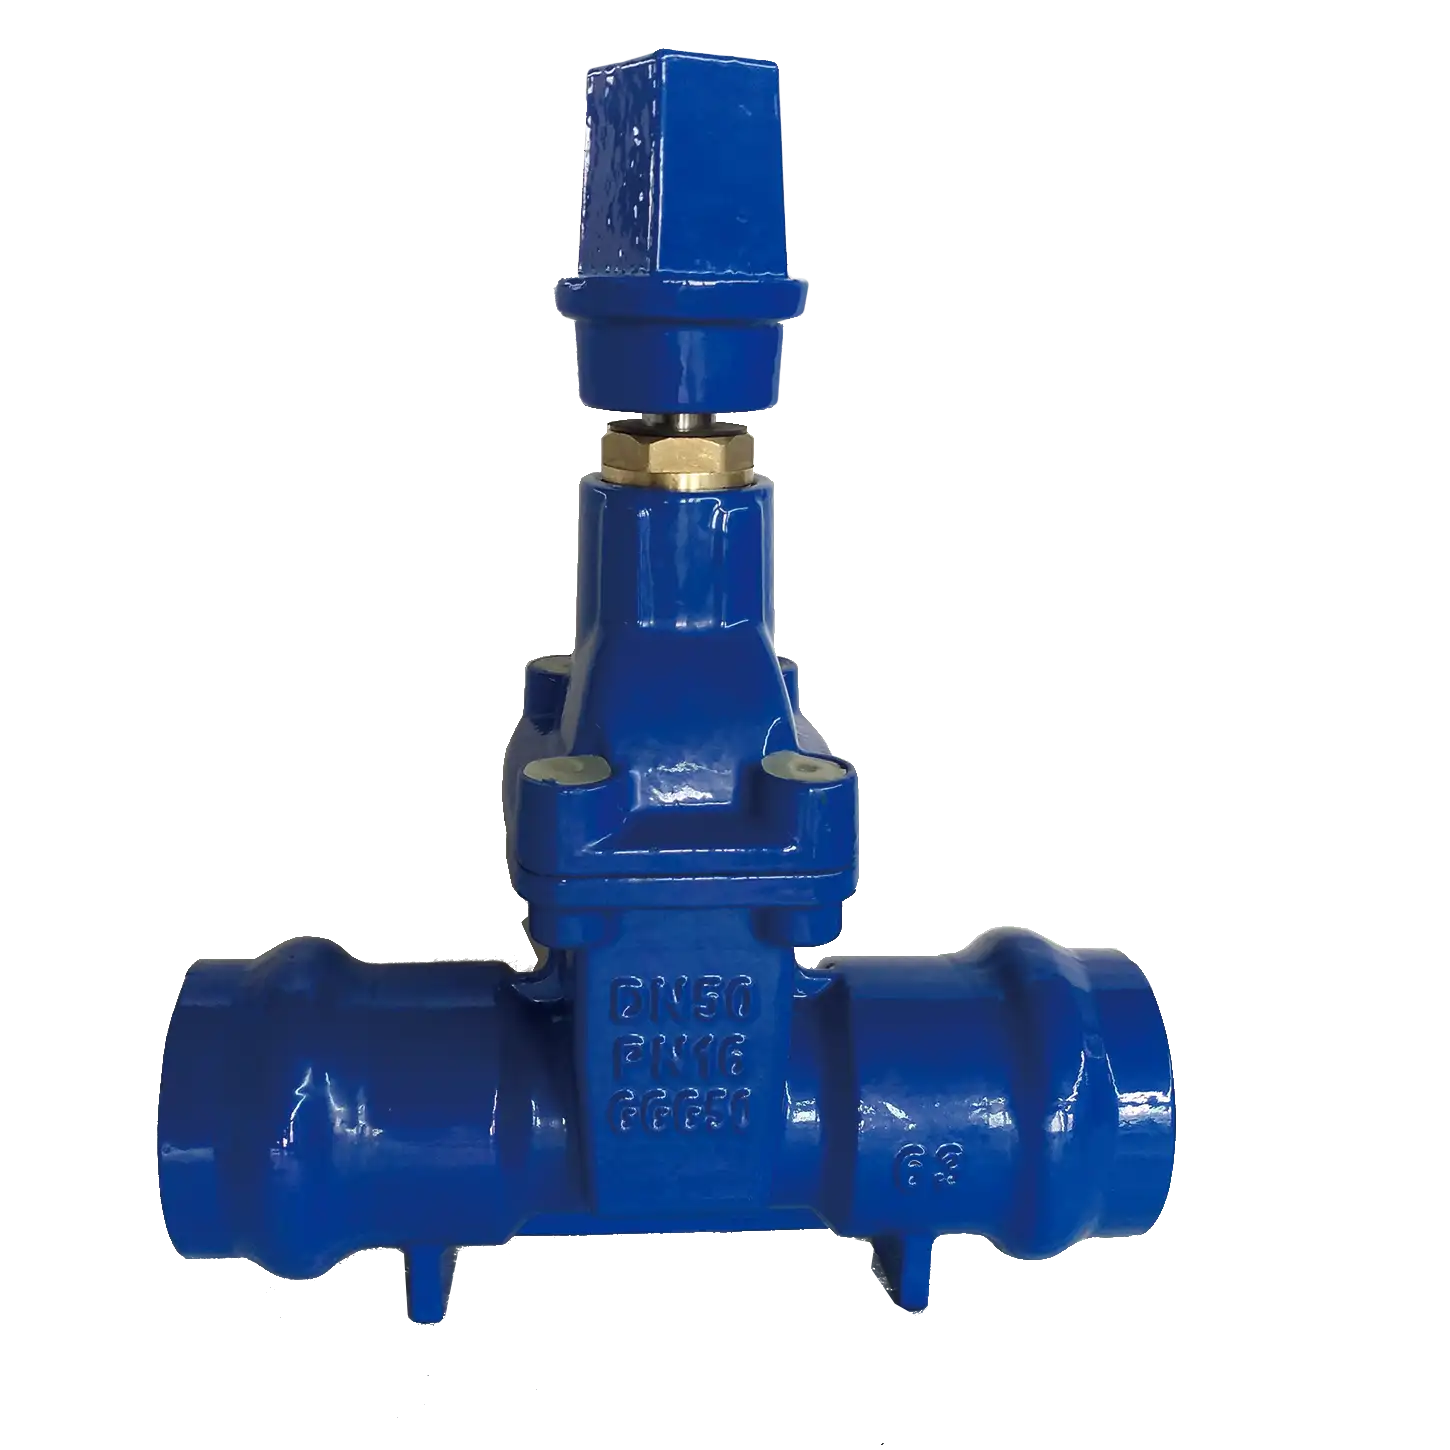 DIN3352/3302 F5 Socket/Flanged Resilient seated gate valve For PVC water pipes